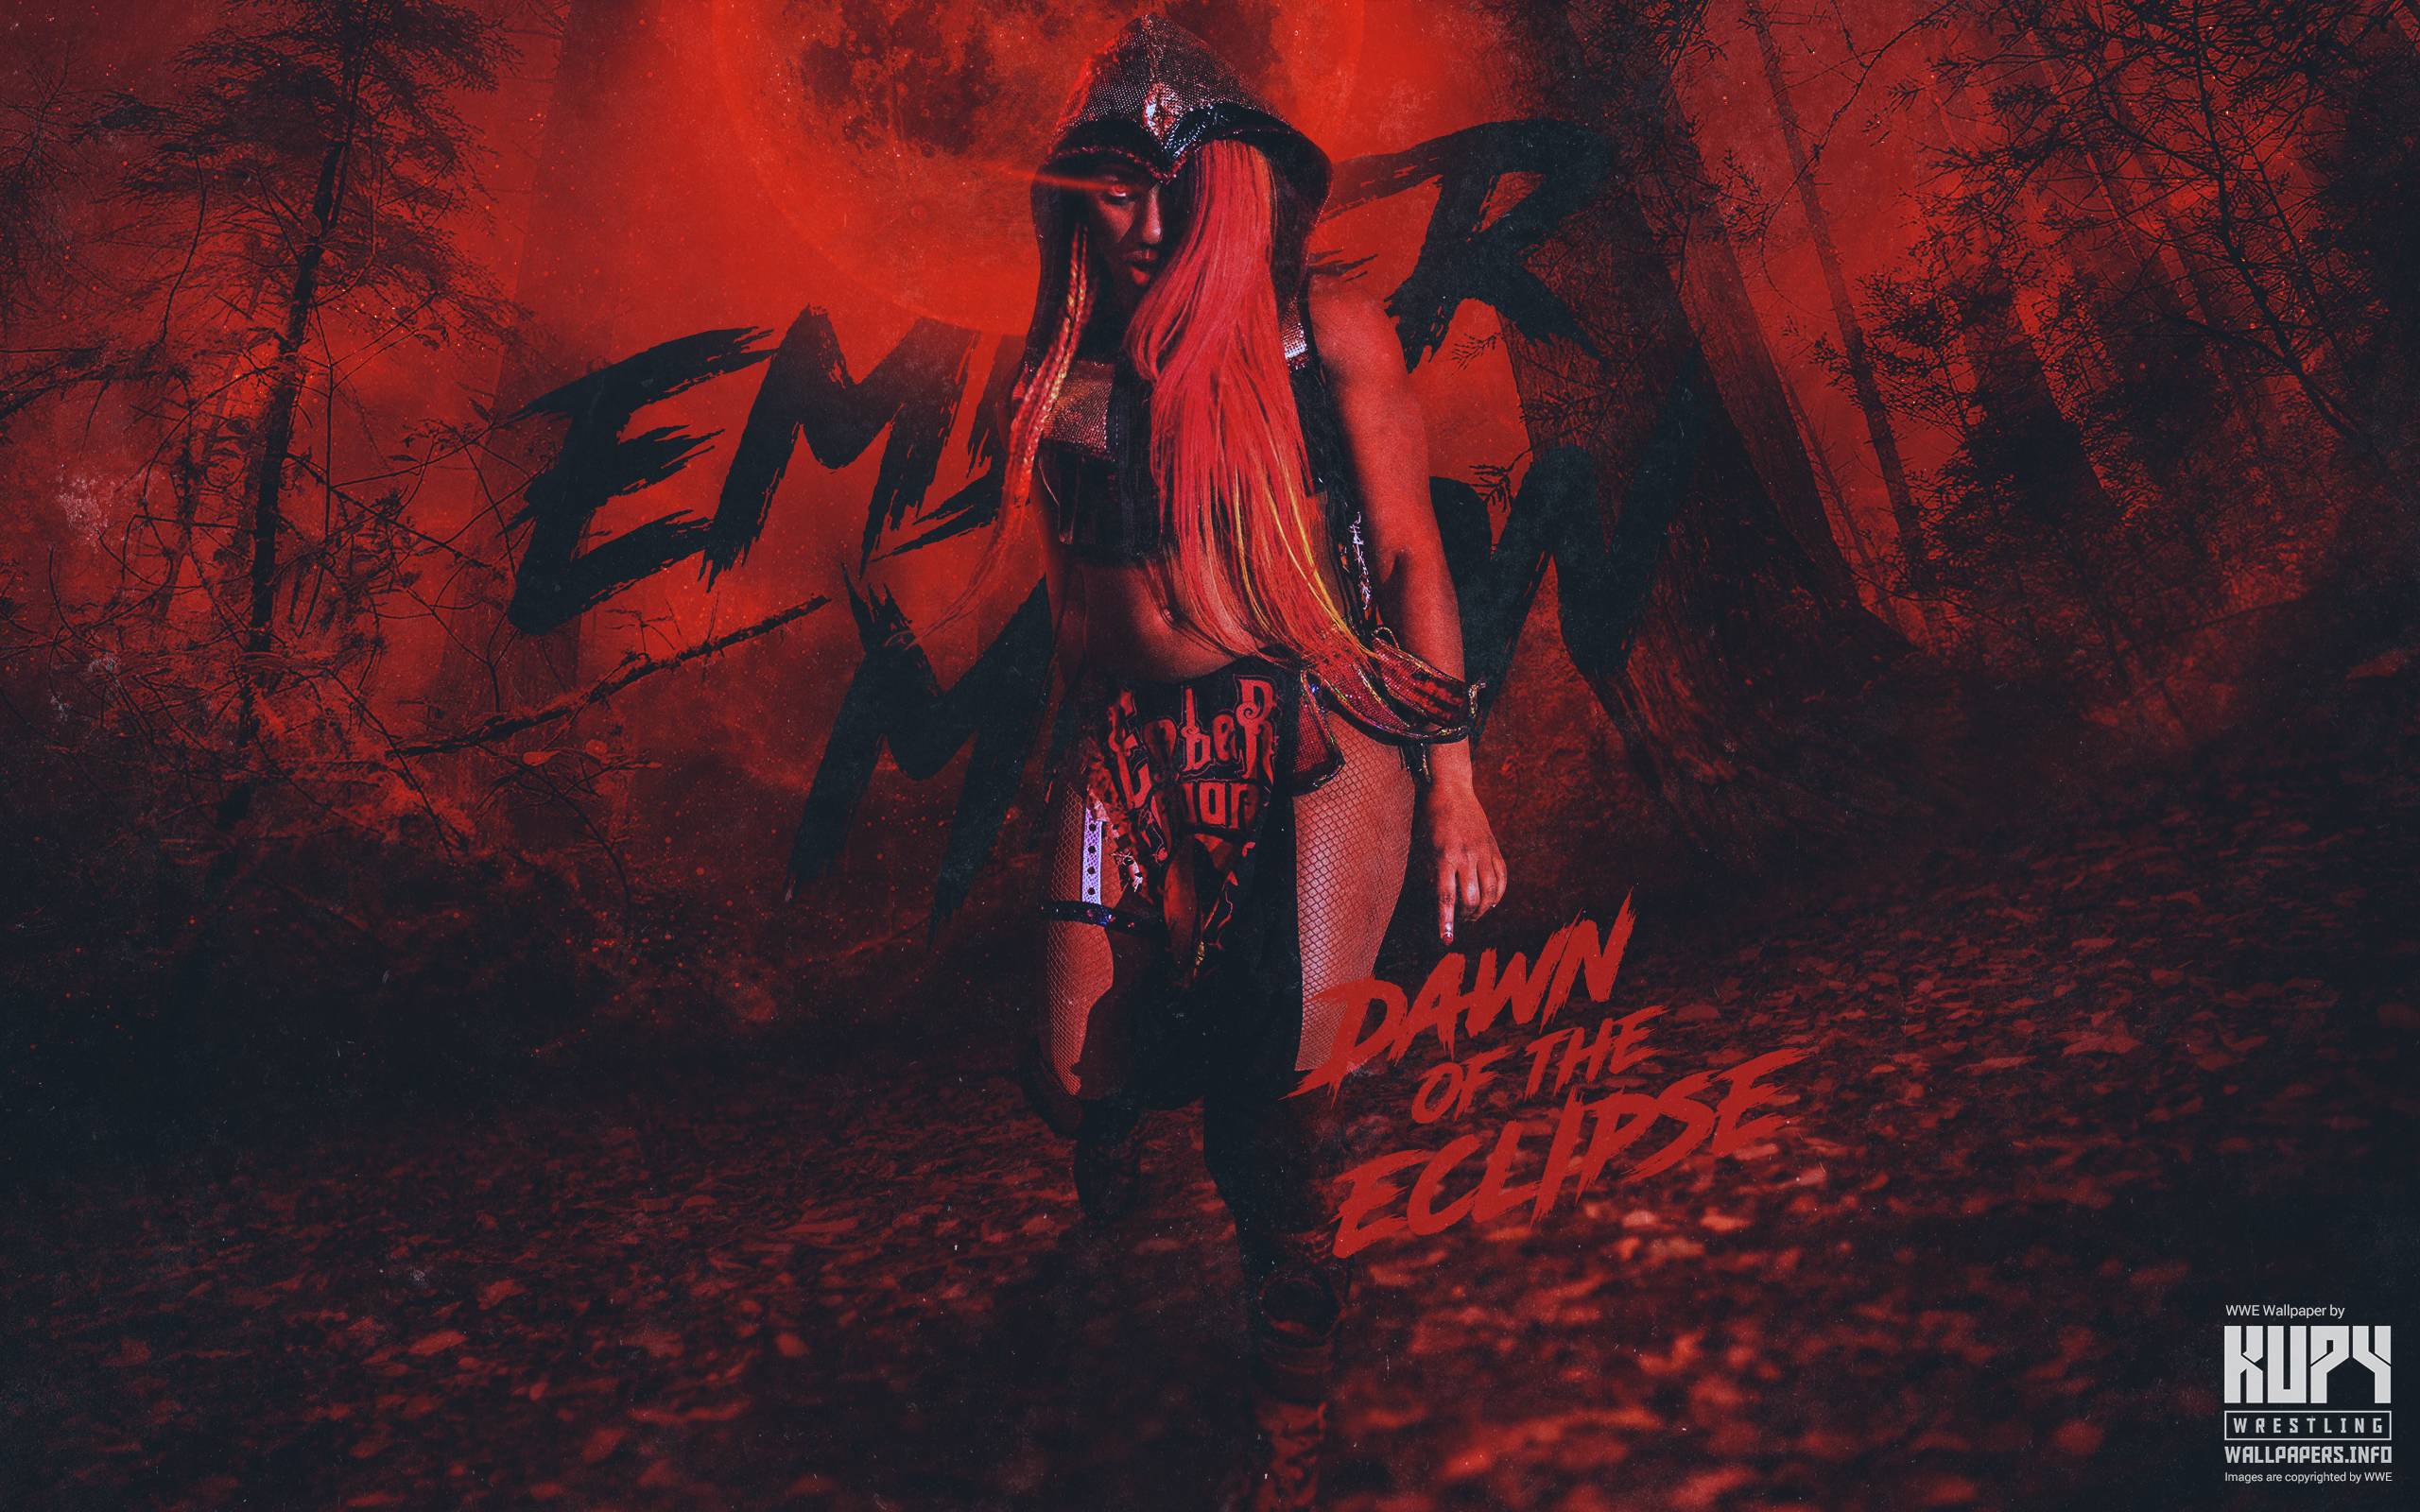 Ember moon eclipse